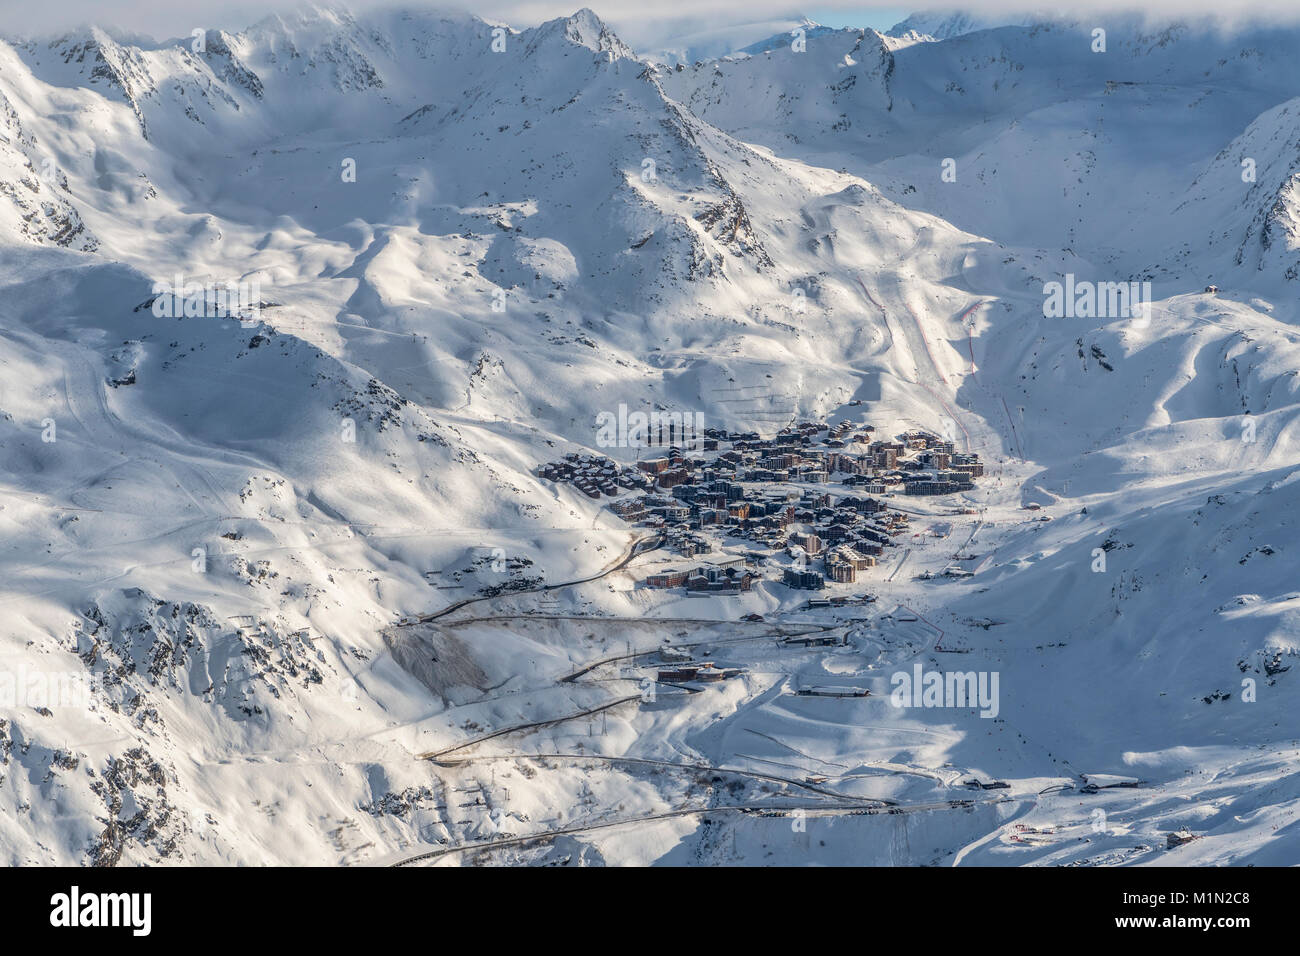 Distant view from La Masse of the ski resort of Val Thorens in the Bellevill Valley in the Three Valleys ski region of France Stock Photo